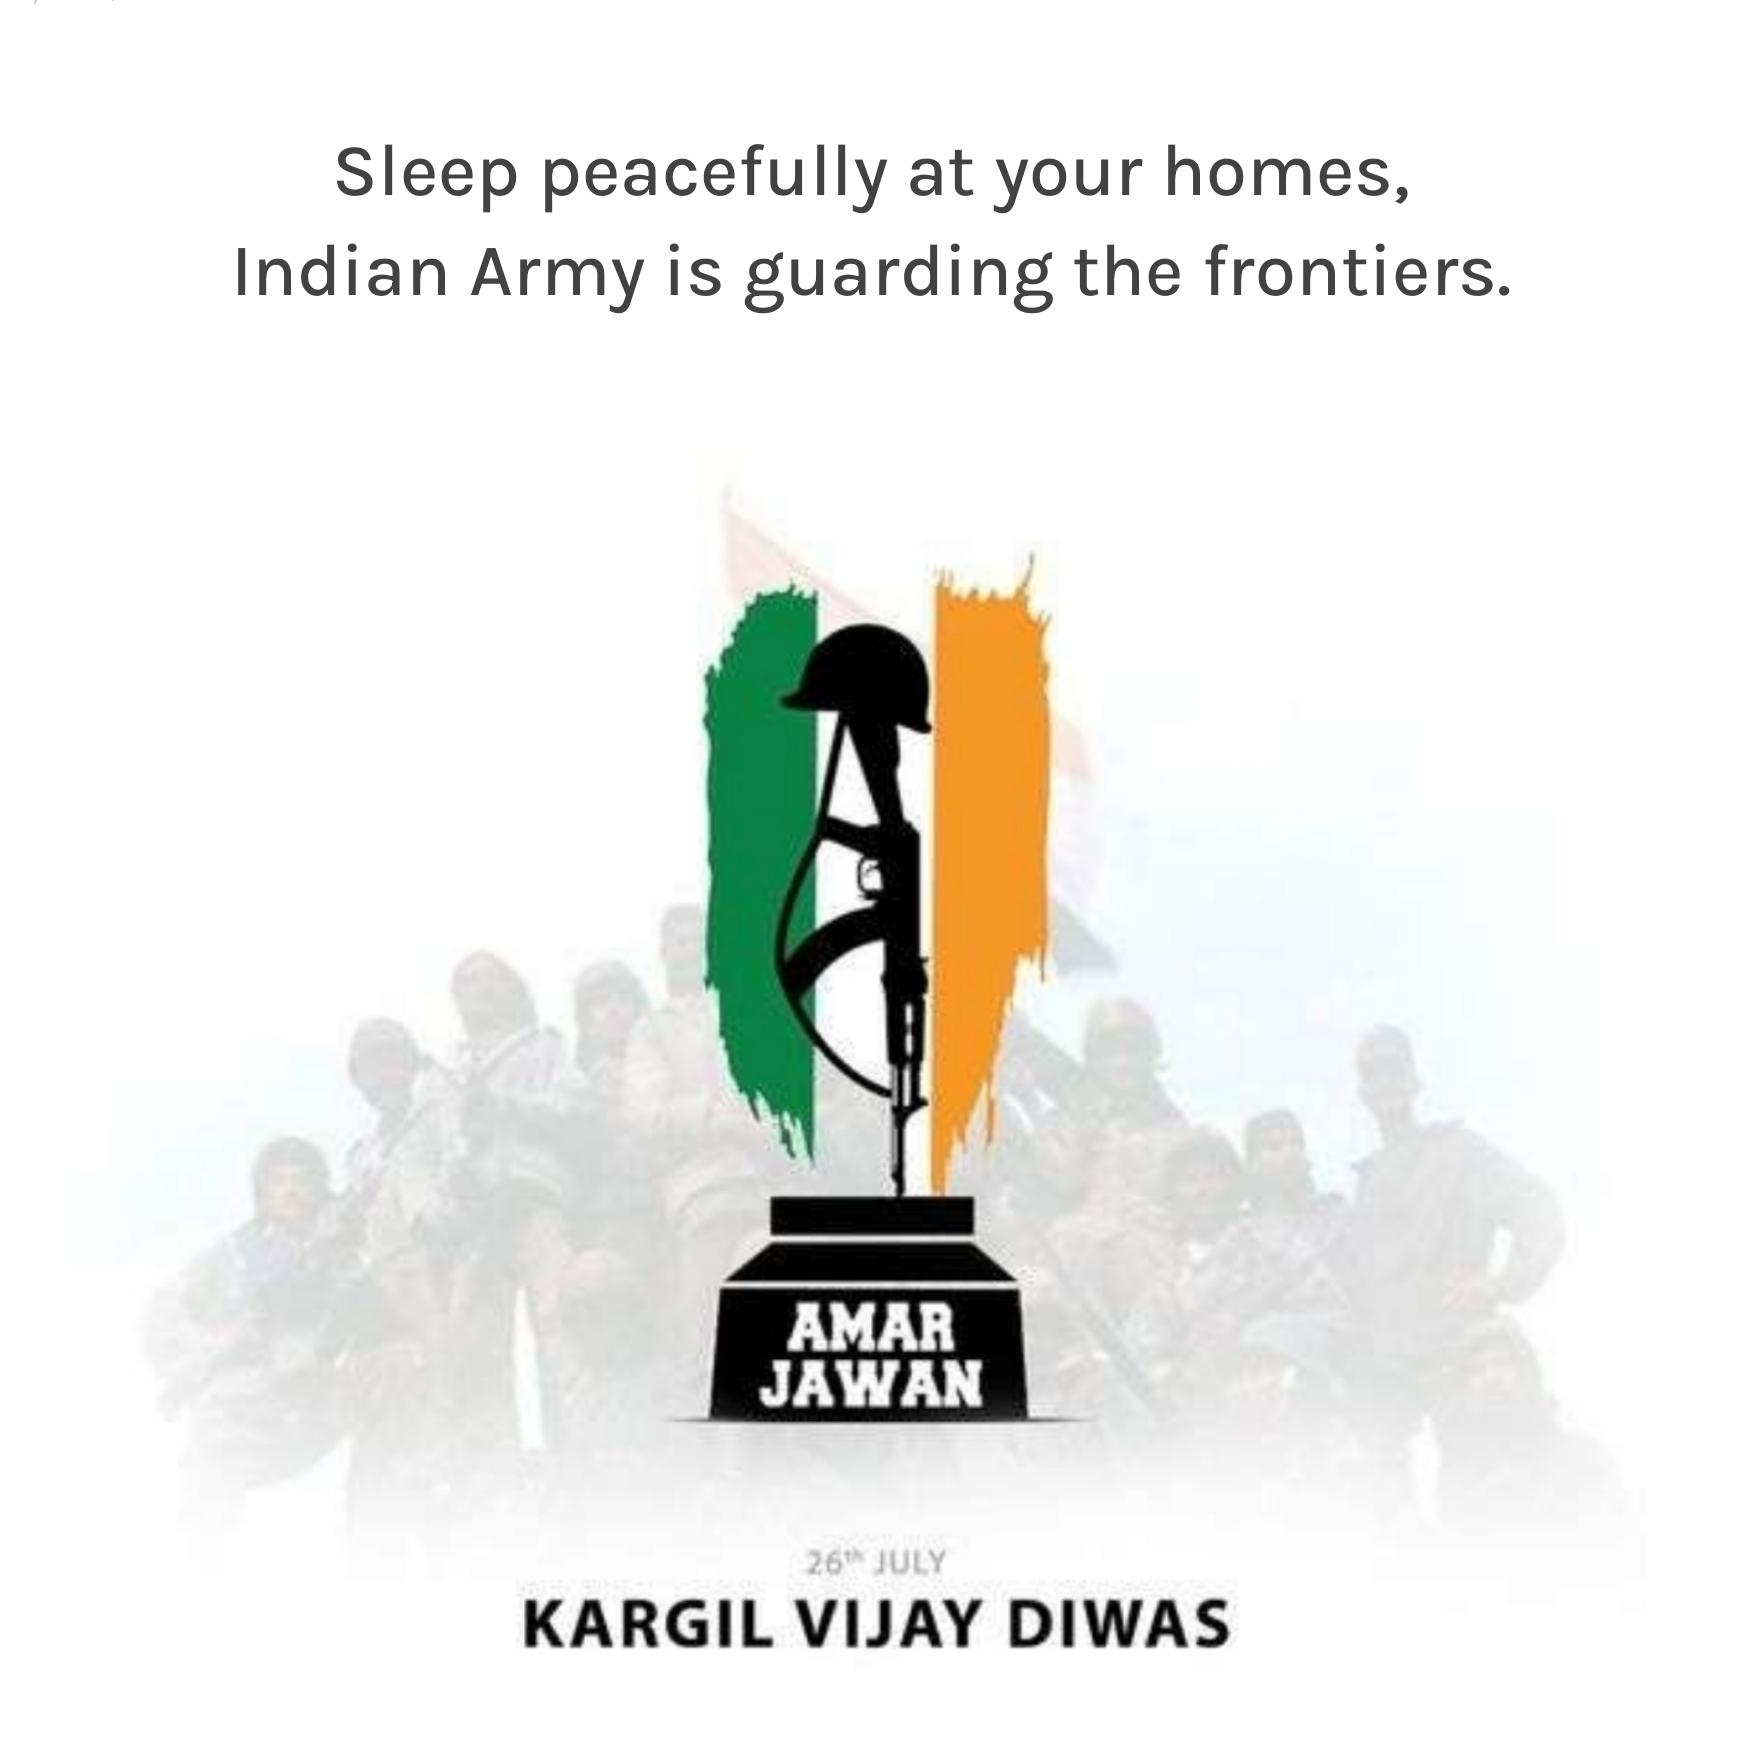 Sleep peacefully at your homes Indian Army is guarding the frontiers